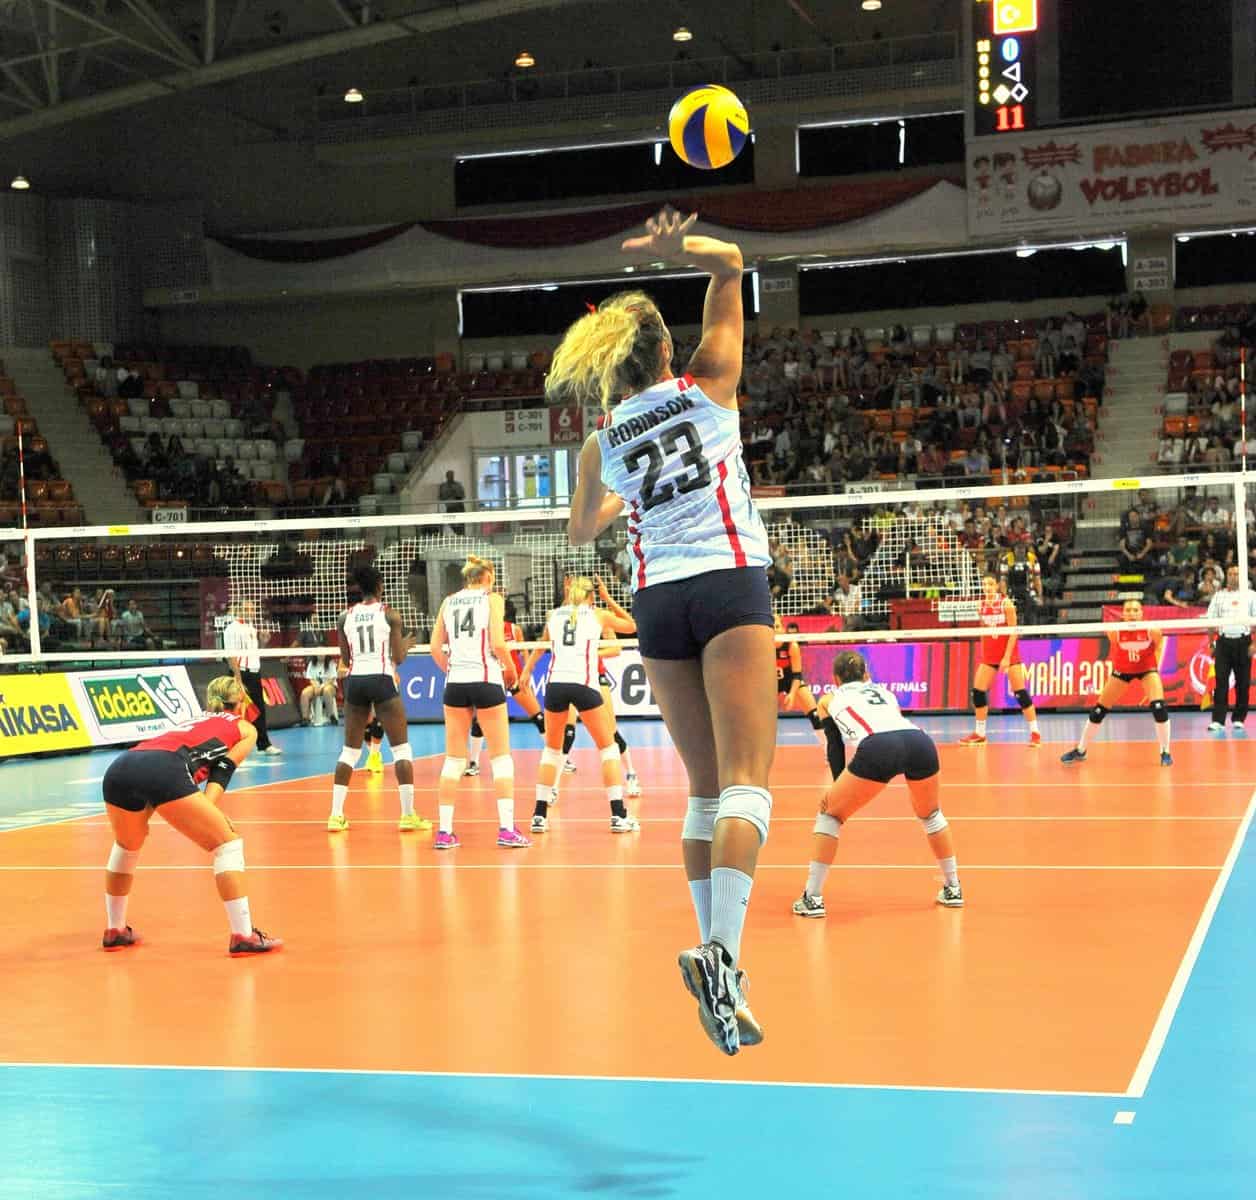 kelsey robinson volleyball player team usa